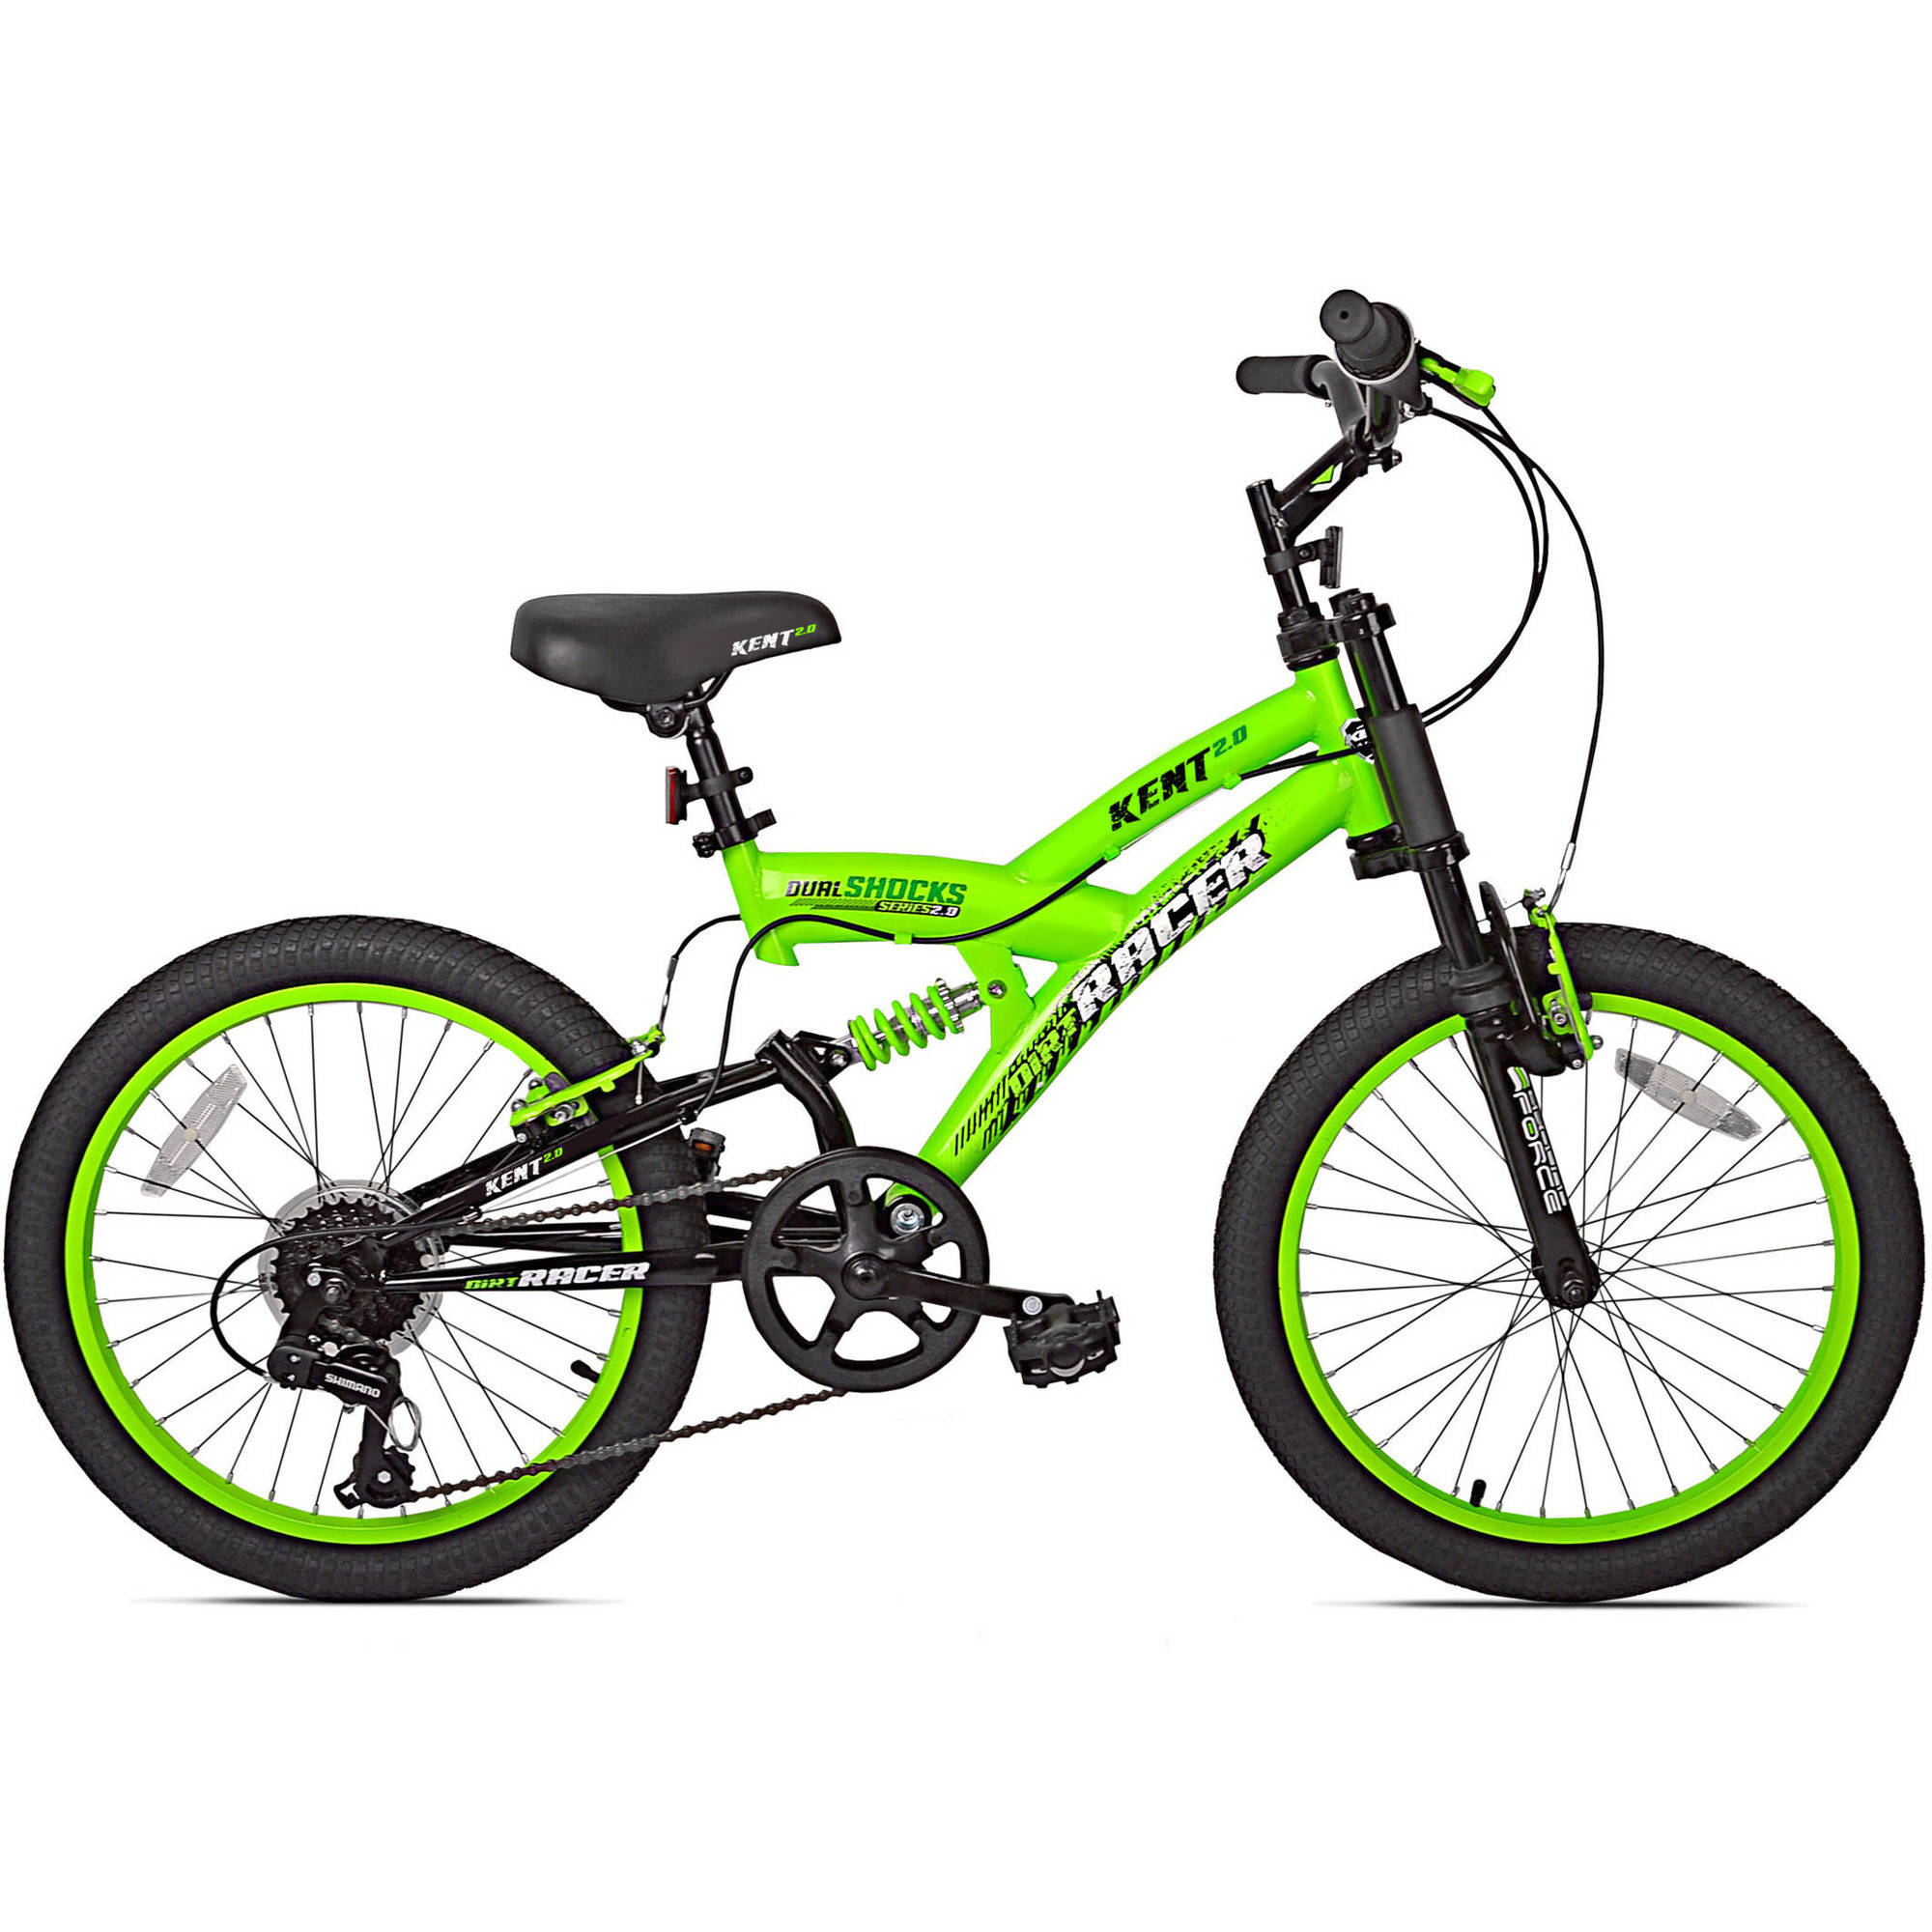 What Is The Best Bike For 10 Year Old? See Our Review